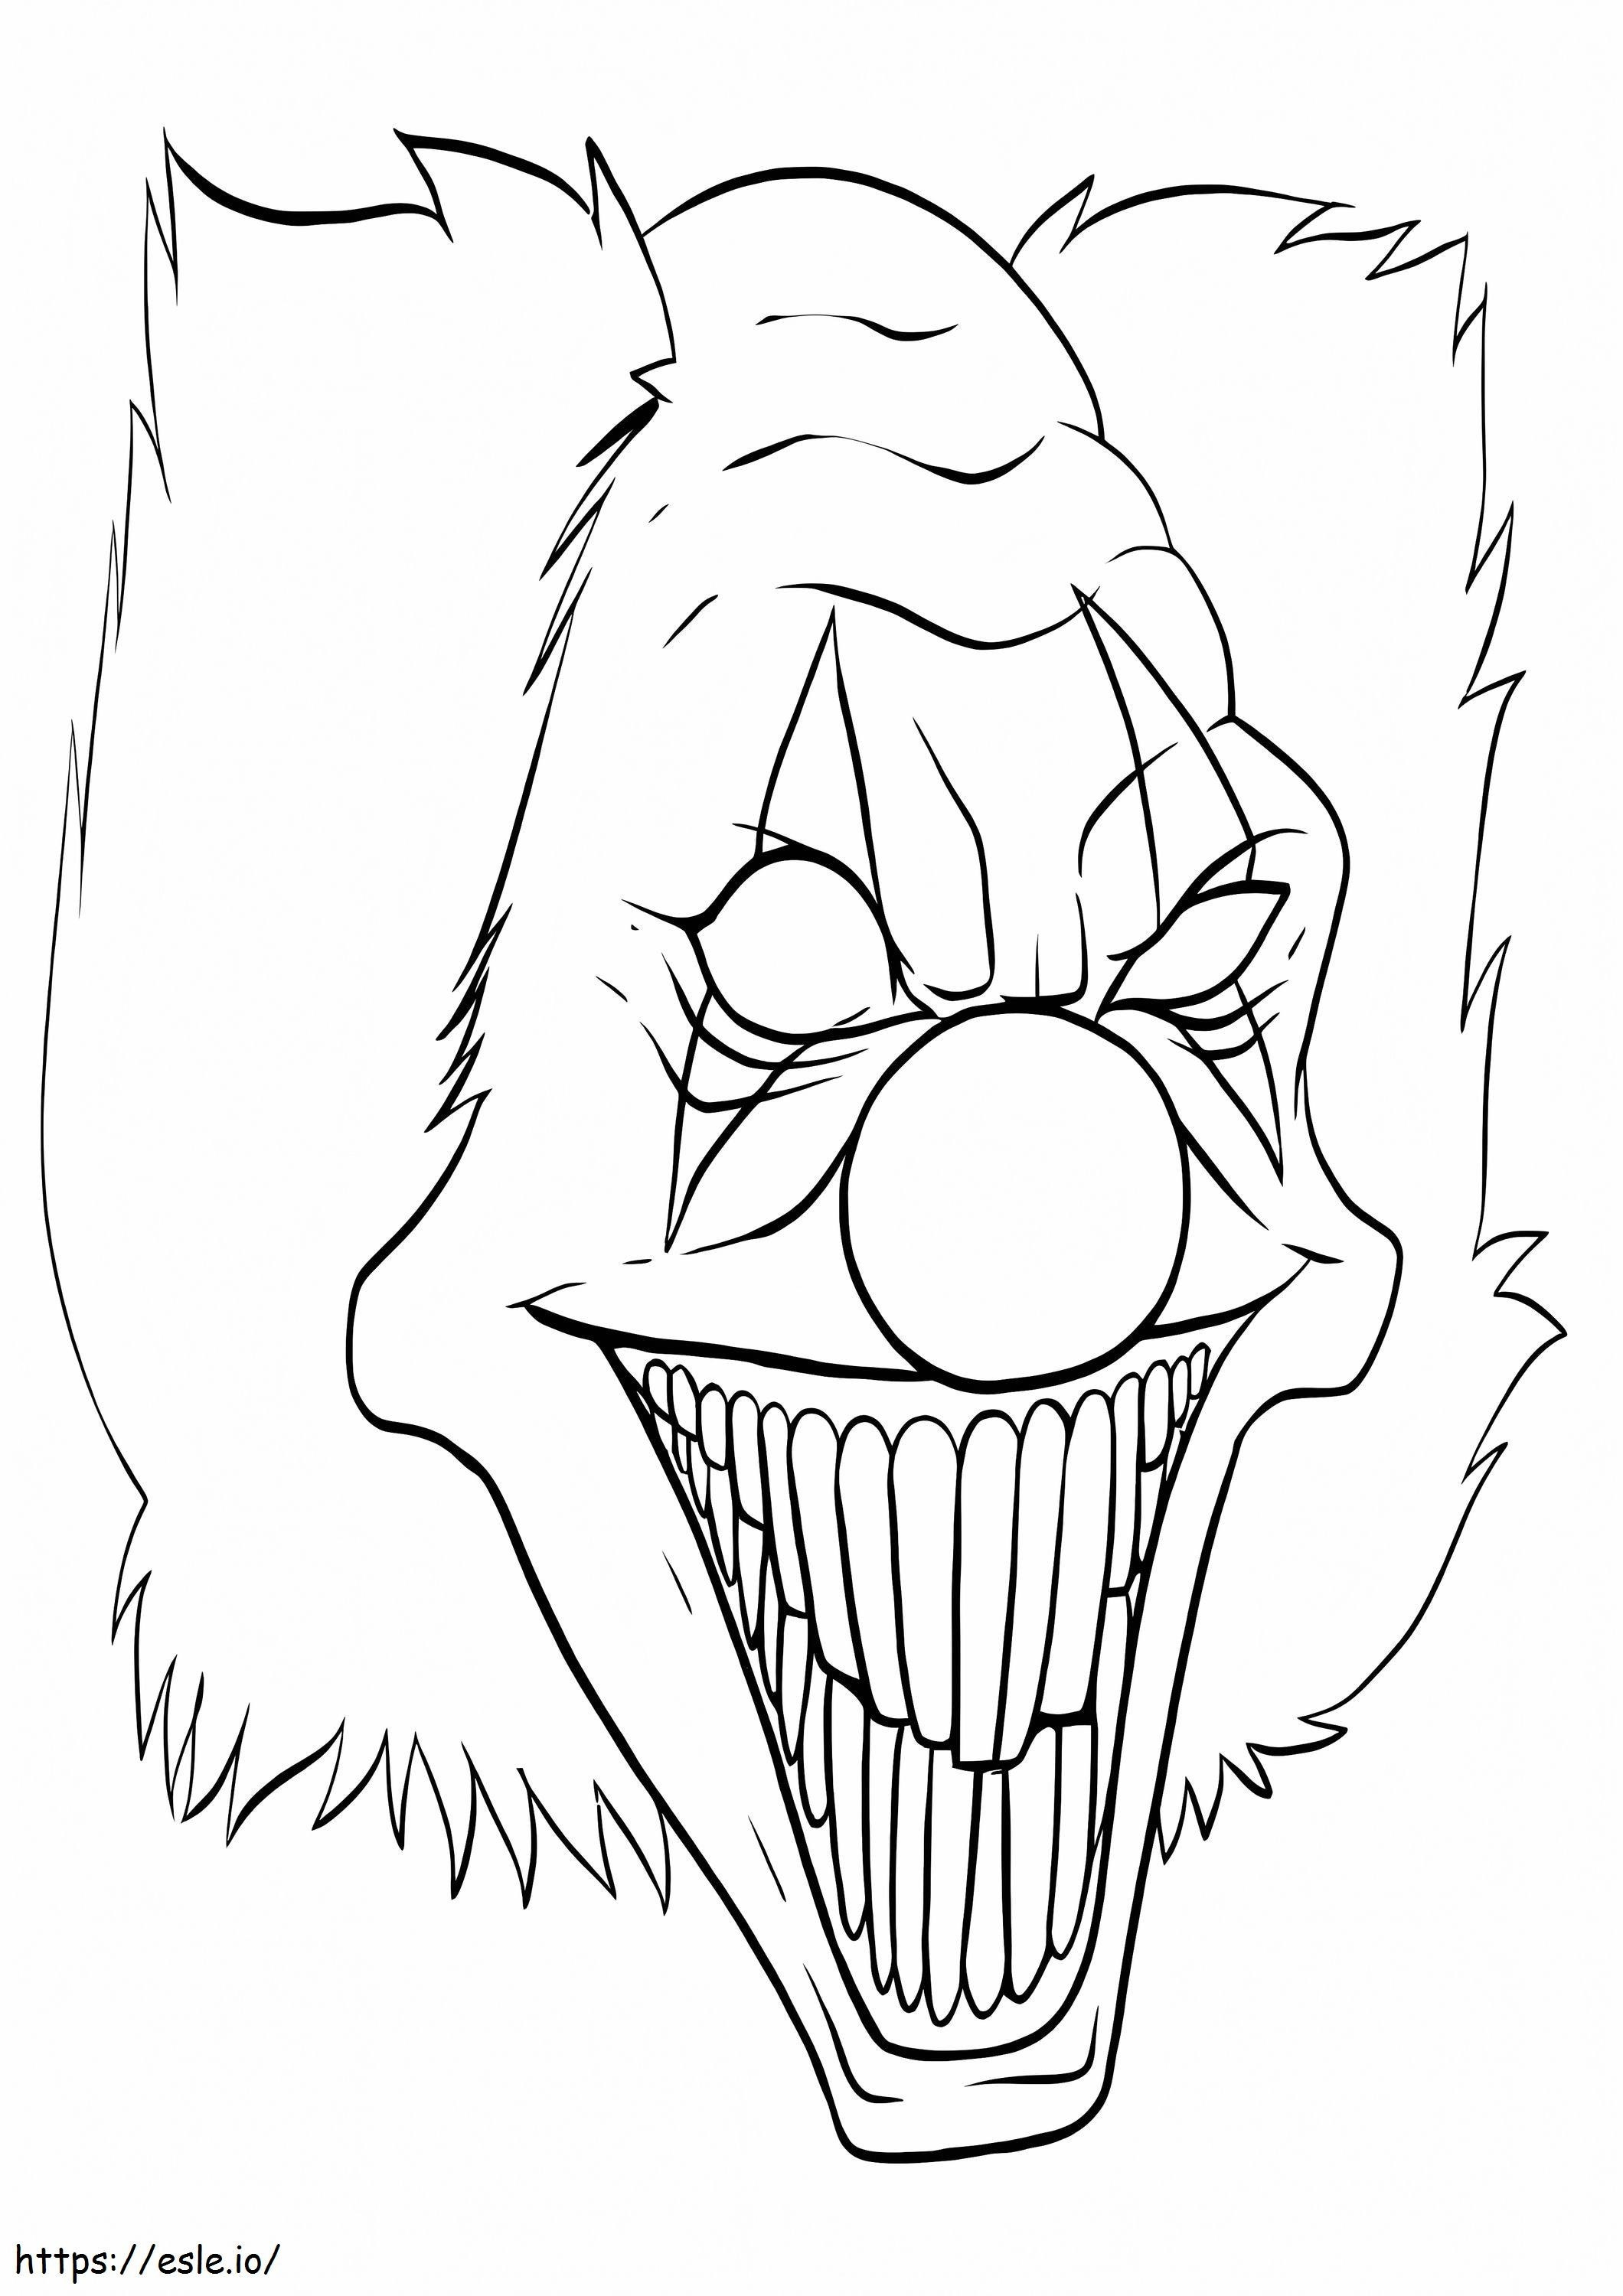 Scary Mask coloring page